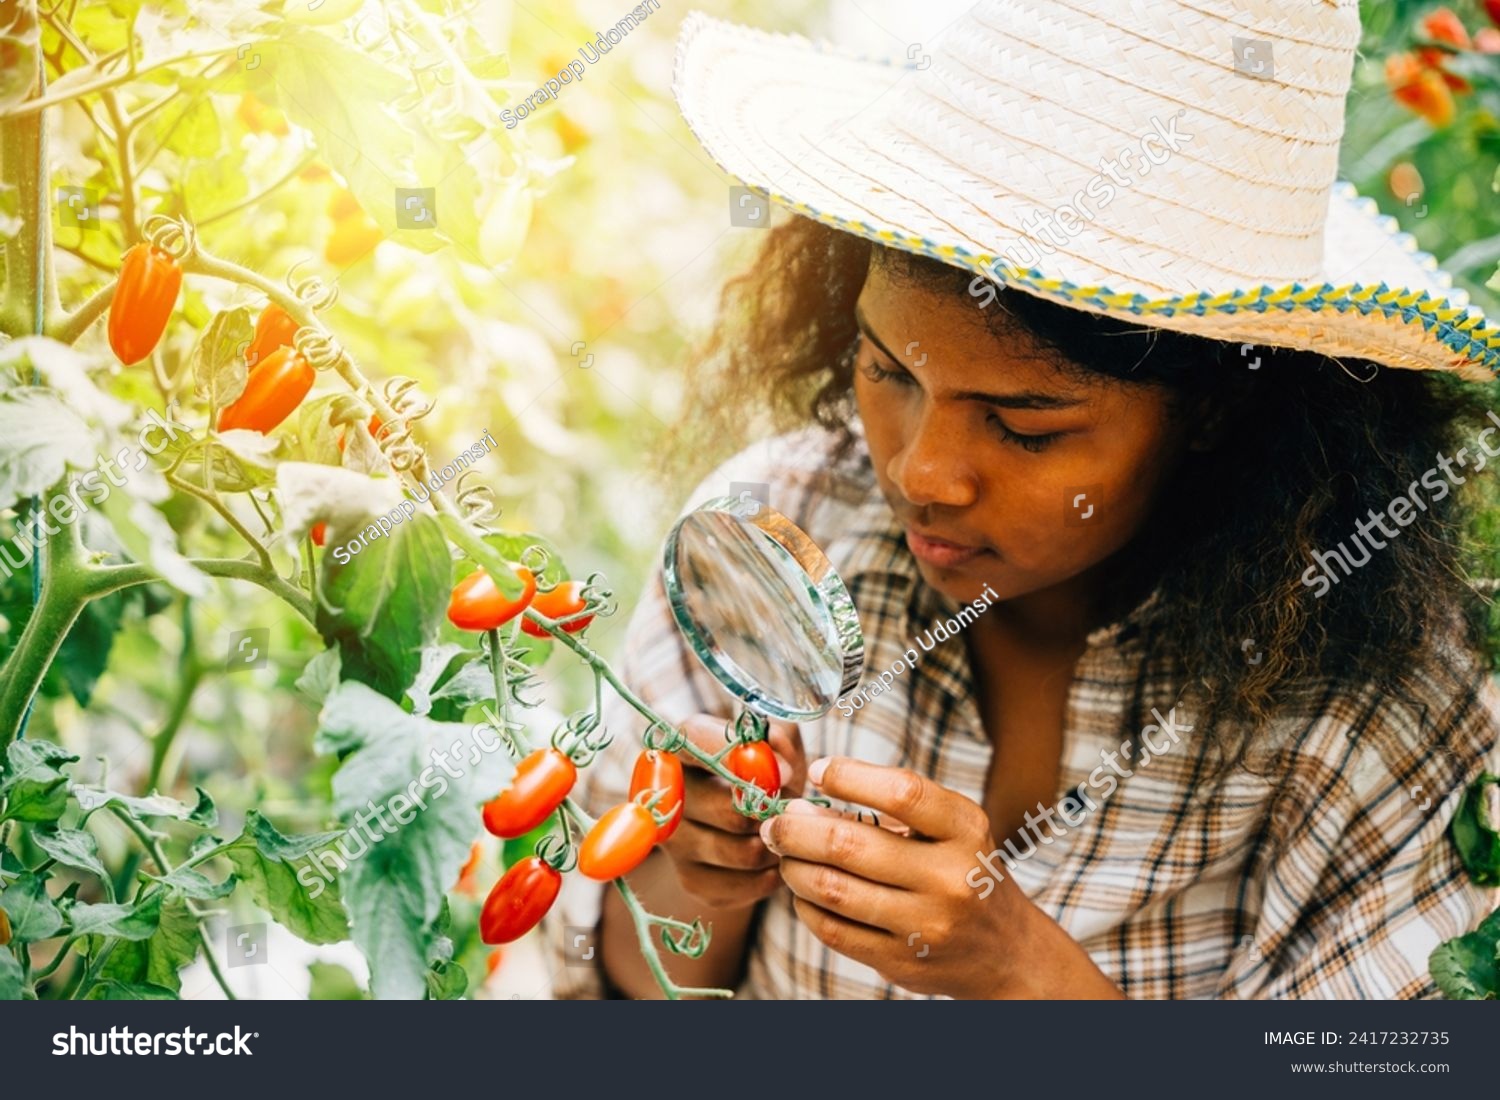 Botanist a black woman inspector uses a magnifying glass to examine tomato quality for herbology research checking for lice. Expertise and learning in plant science and farming. #2417232735